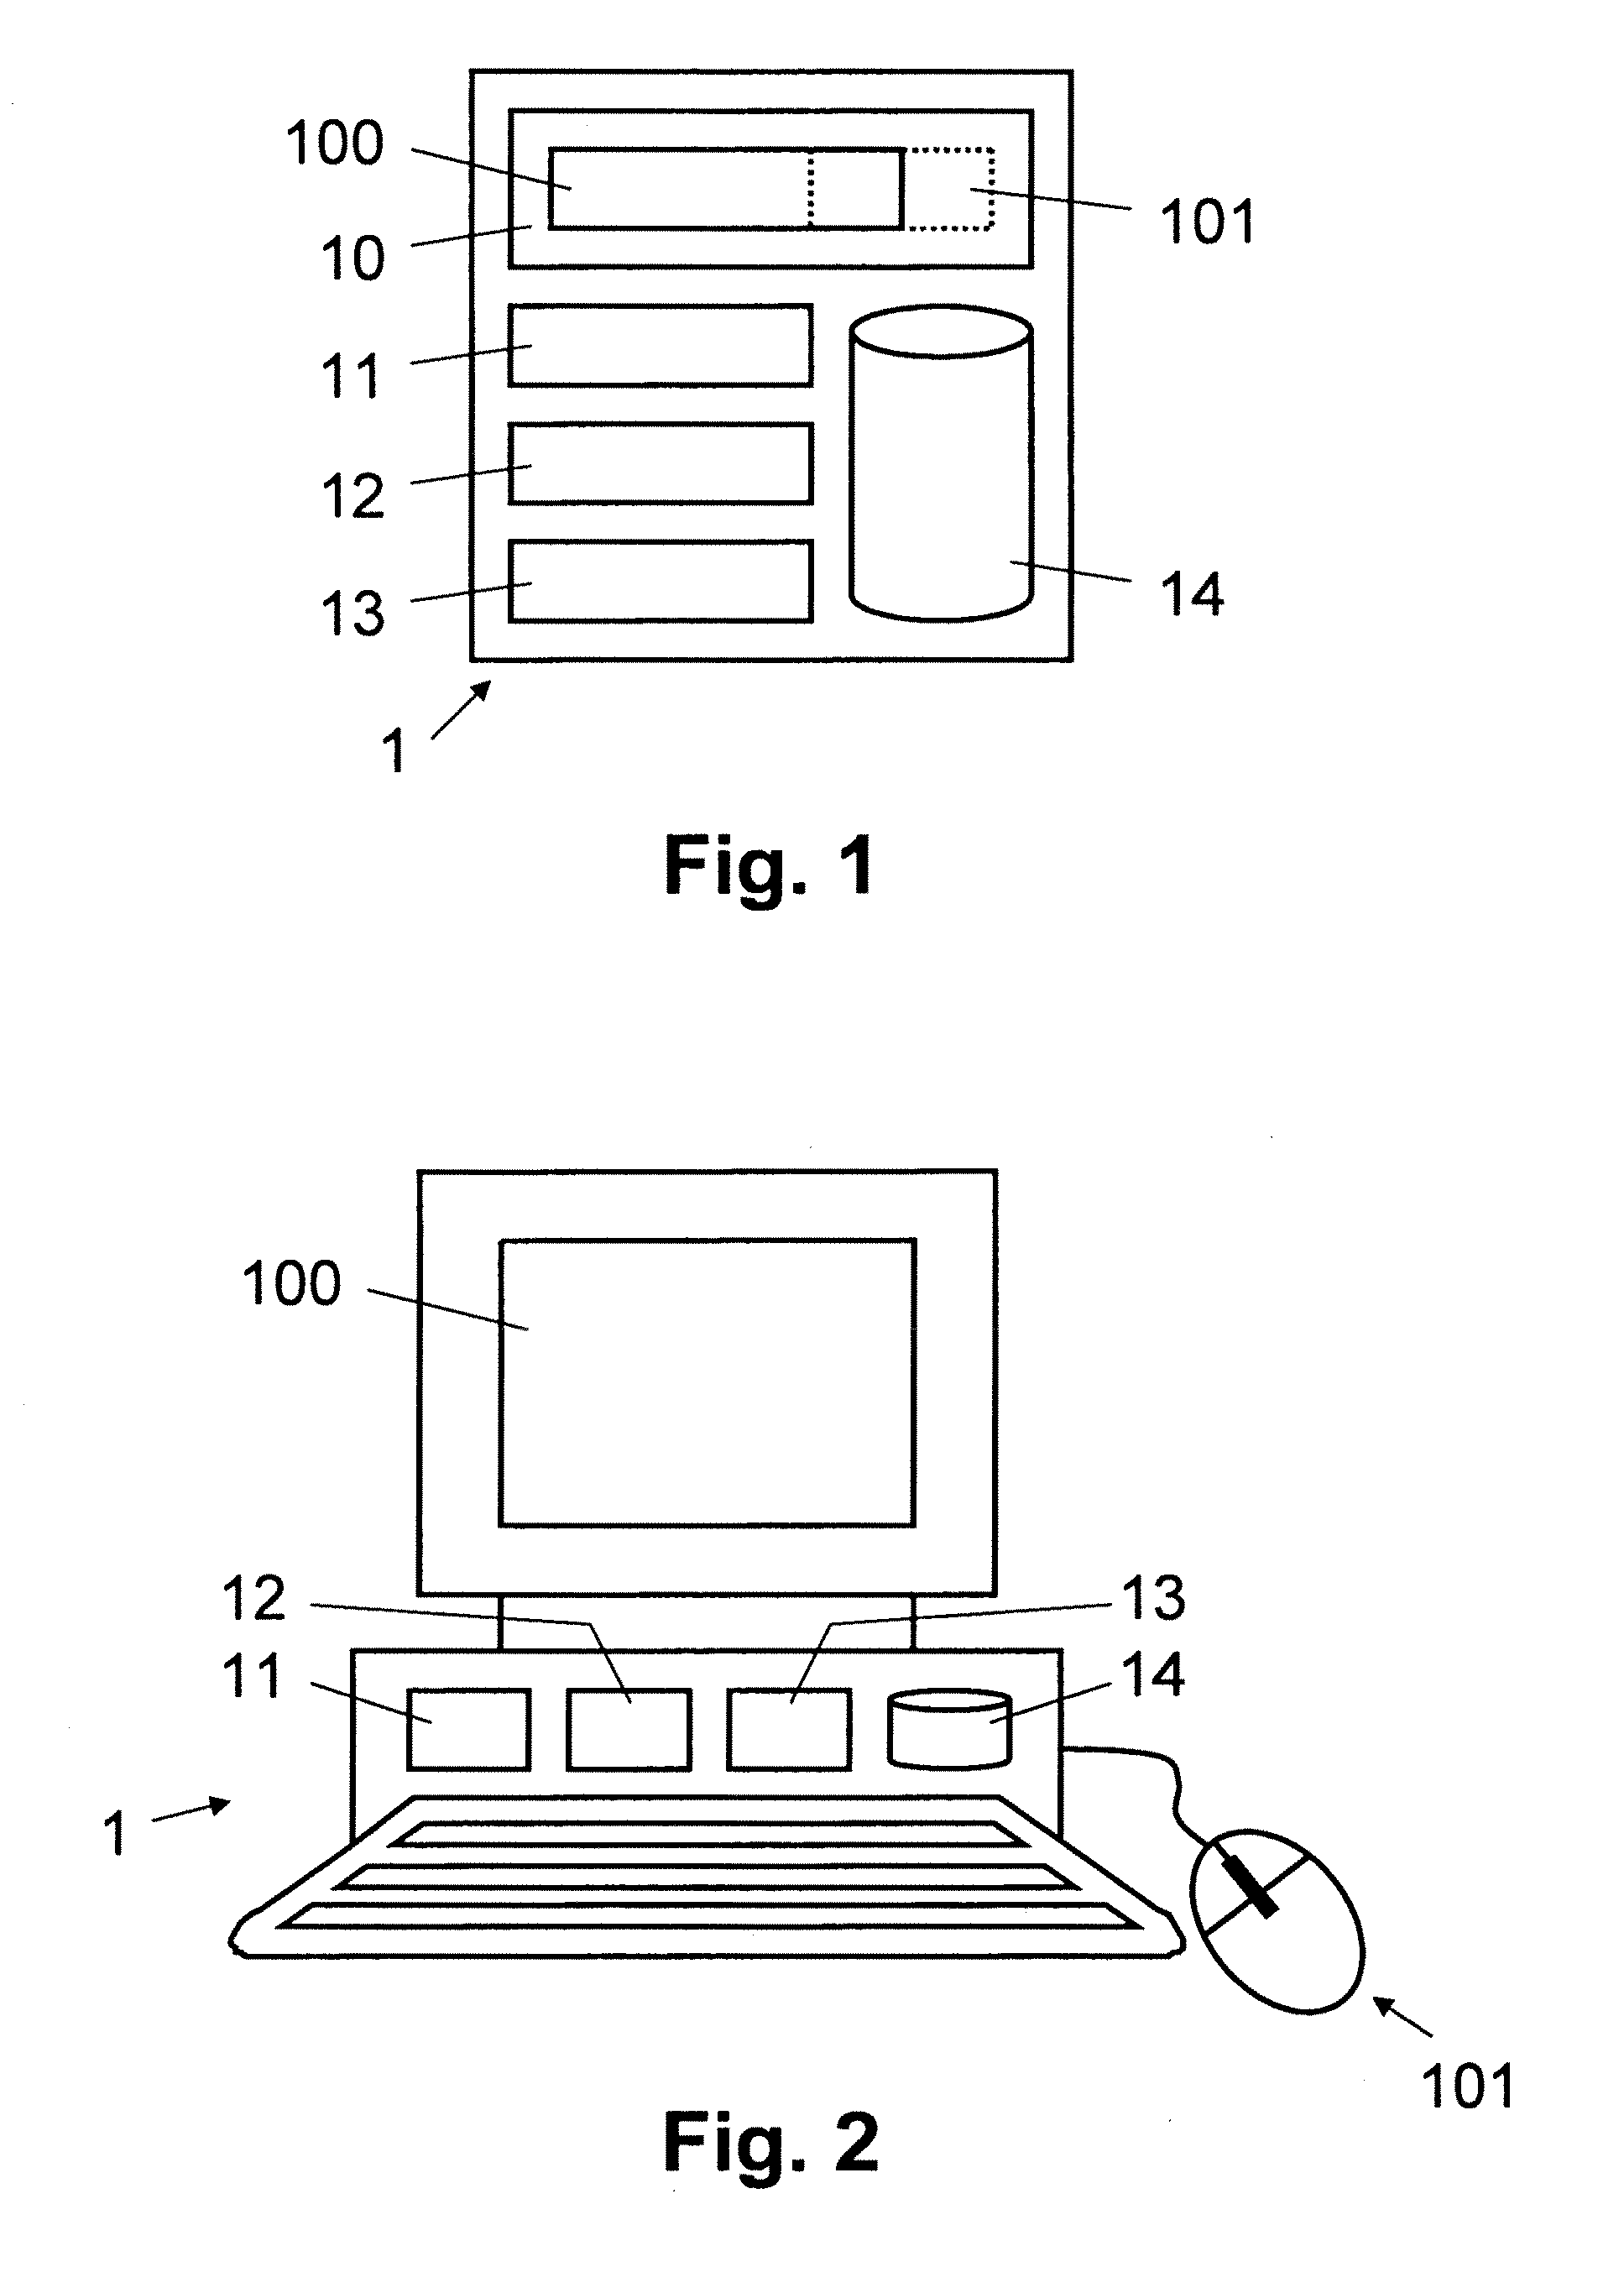 System and method for estimating collision damage to a car